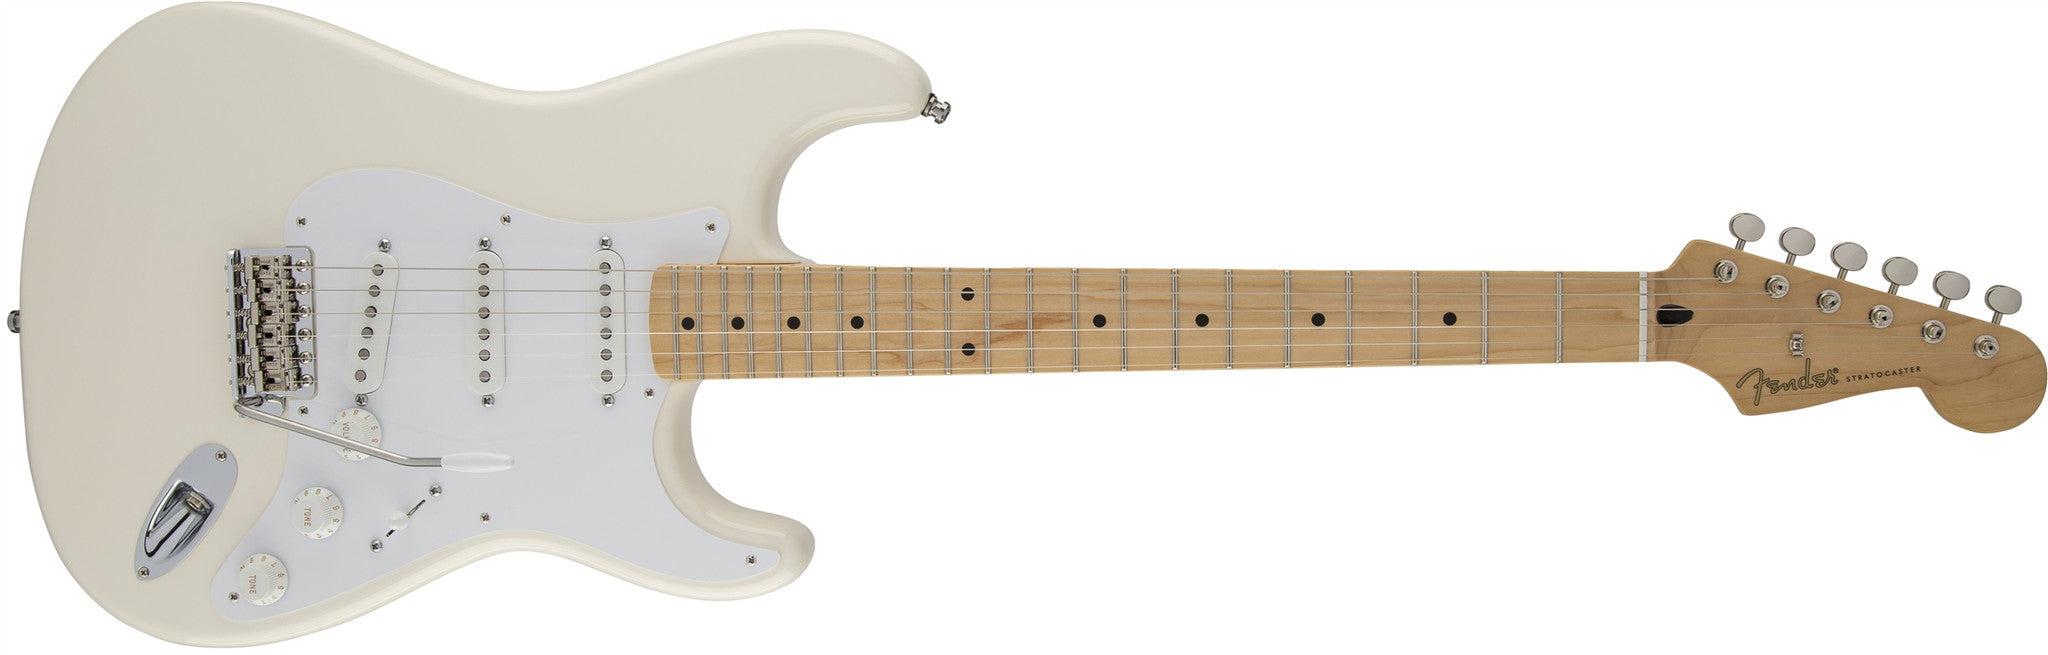 Fender Jimmie Vaughan Tex-Mex™ Strat®, Maple Fingerboard, Olympic White 0139202305 - L.A. Music - Canada's Favourite Music Store!